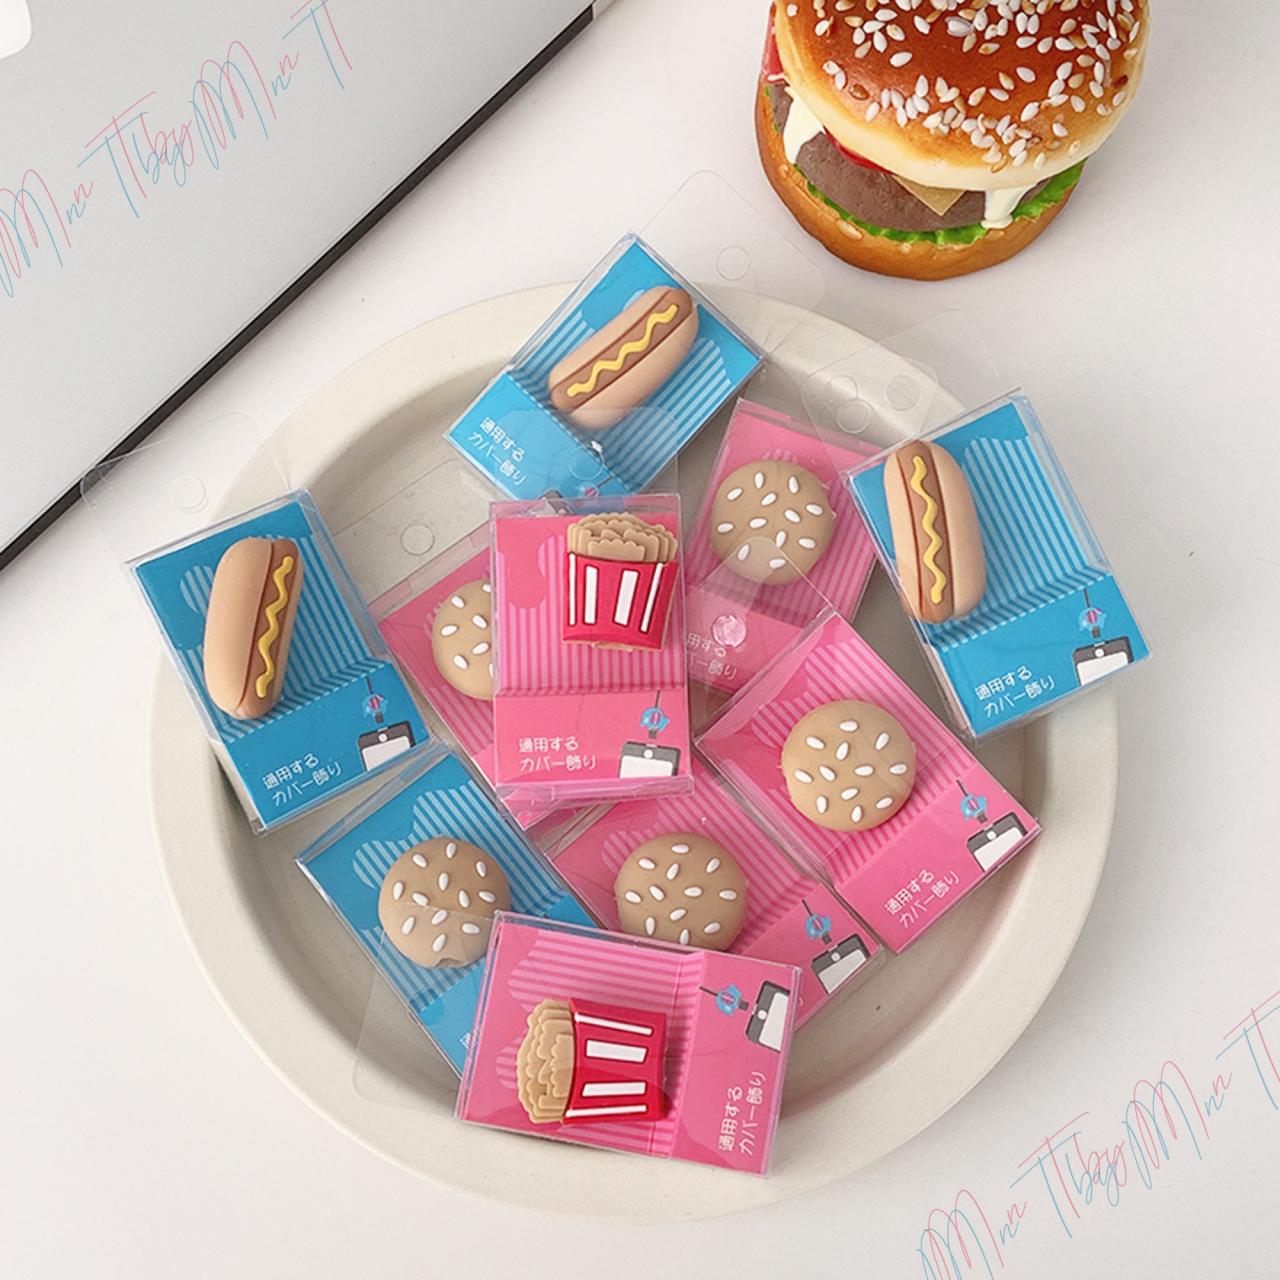 Little Hamburger HotDog French Fries iPhone Charging Cable Bite | Cute Style Silicone Charging Cable Protective cover